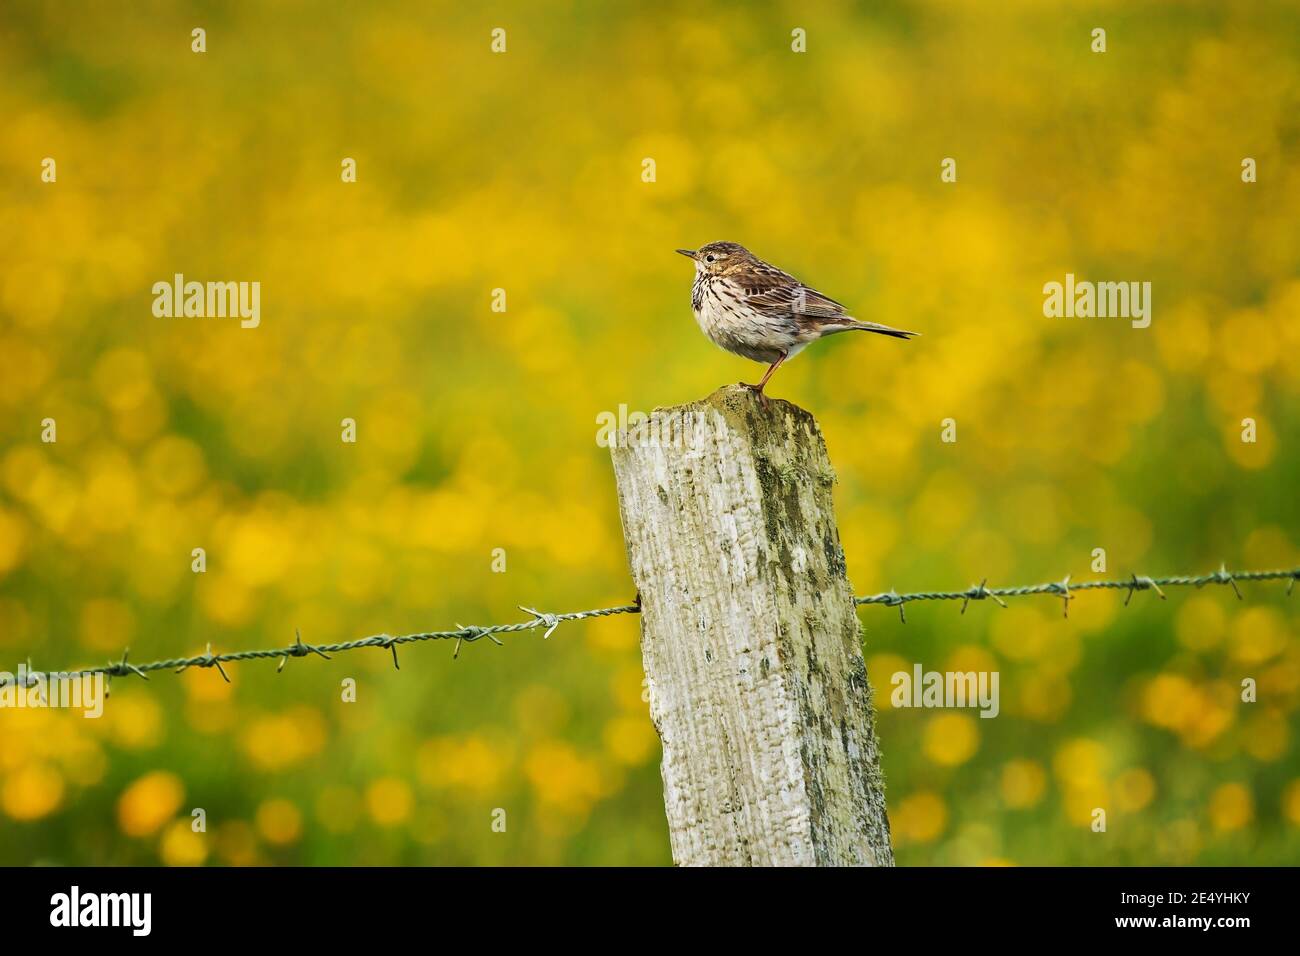 Anthus pratensis meadow pipit small bird sitting on wooden fence post amongst buttercup flowers on blurred yellow background Stock Photo